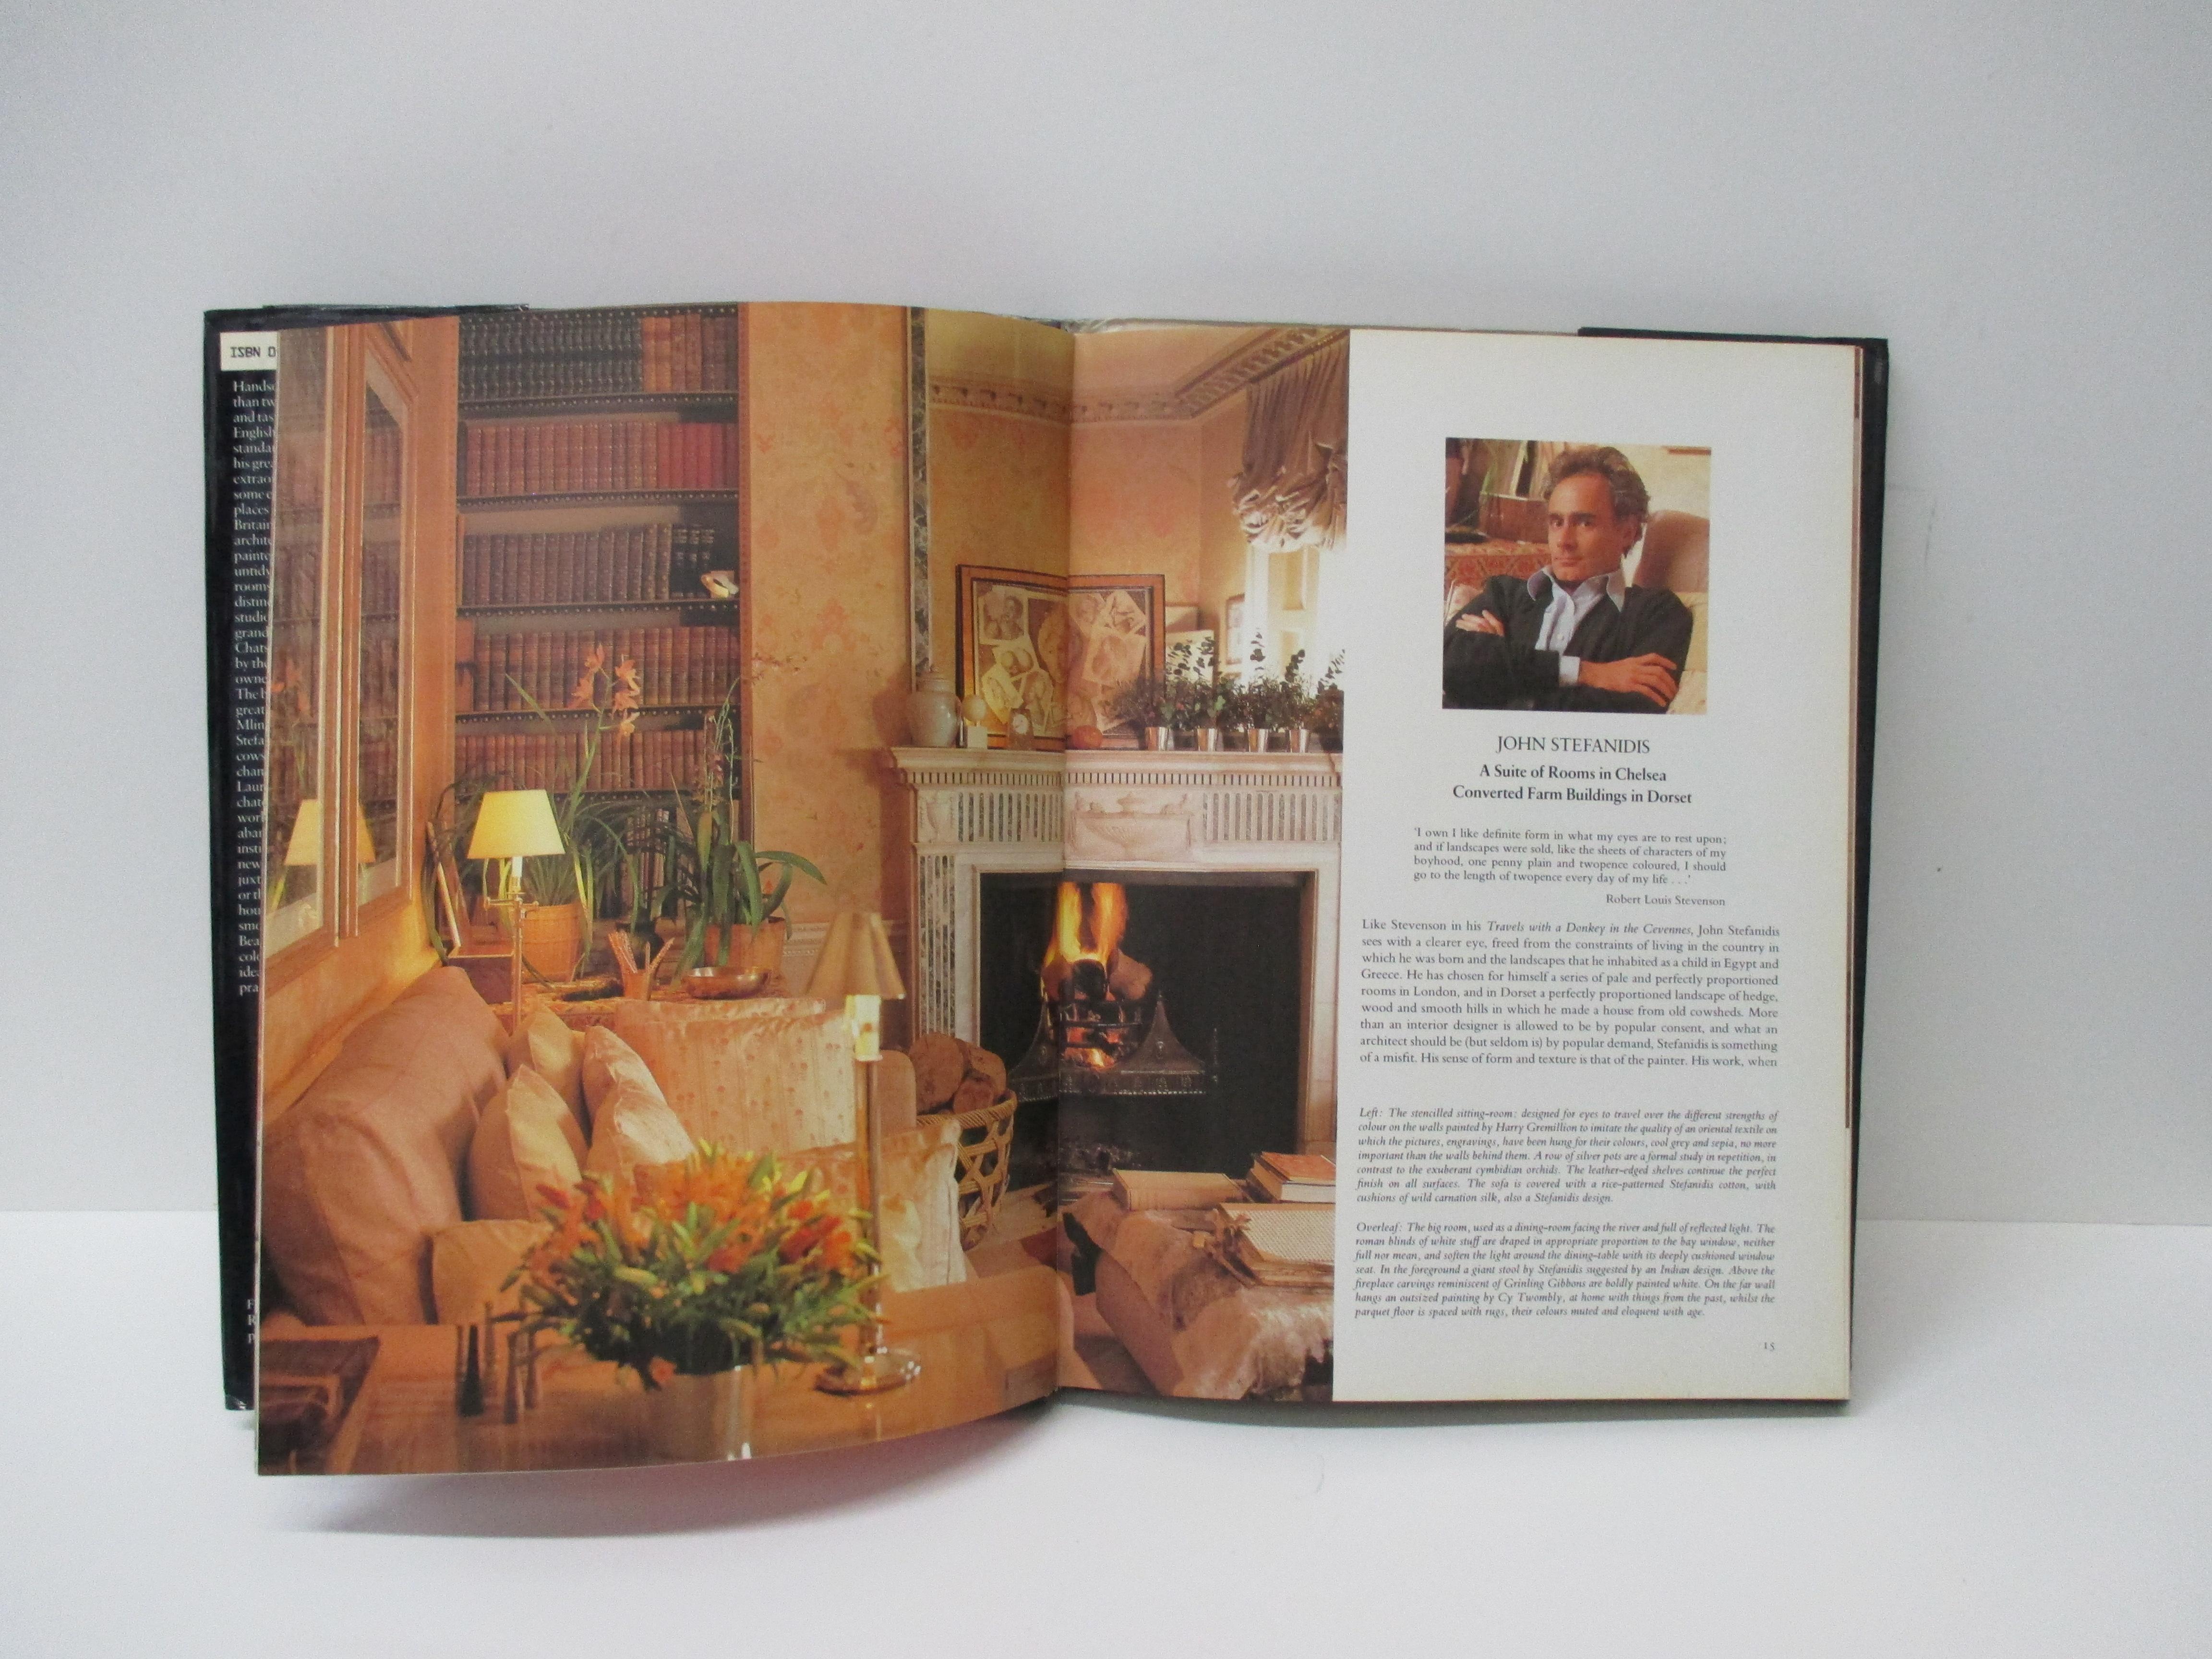 English Elegance
A book of design ideas for the home features more than twenty-five examples of the style and taste that represents true elegance to the English eye...
Hardcover: 160 pages
Publisher: Holt Rinehart & Winston; 1st American ed